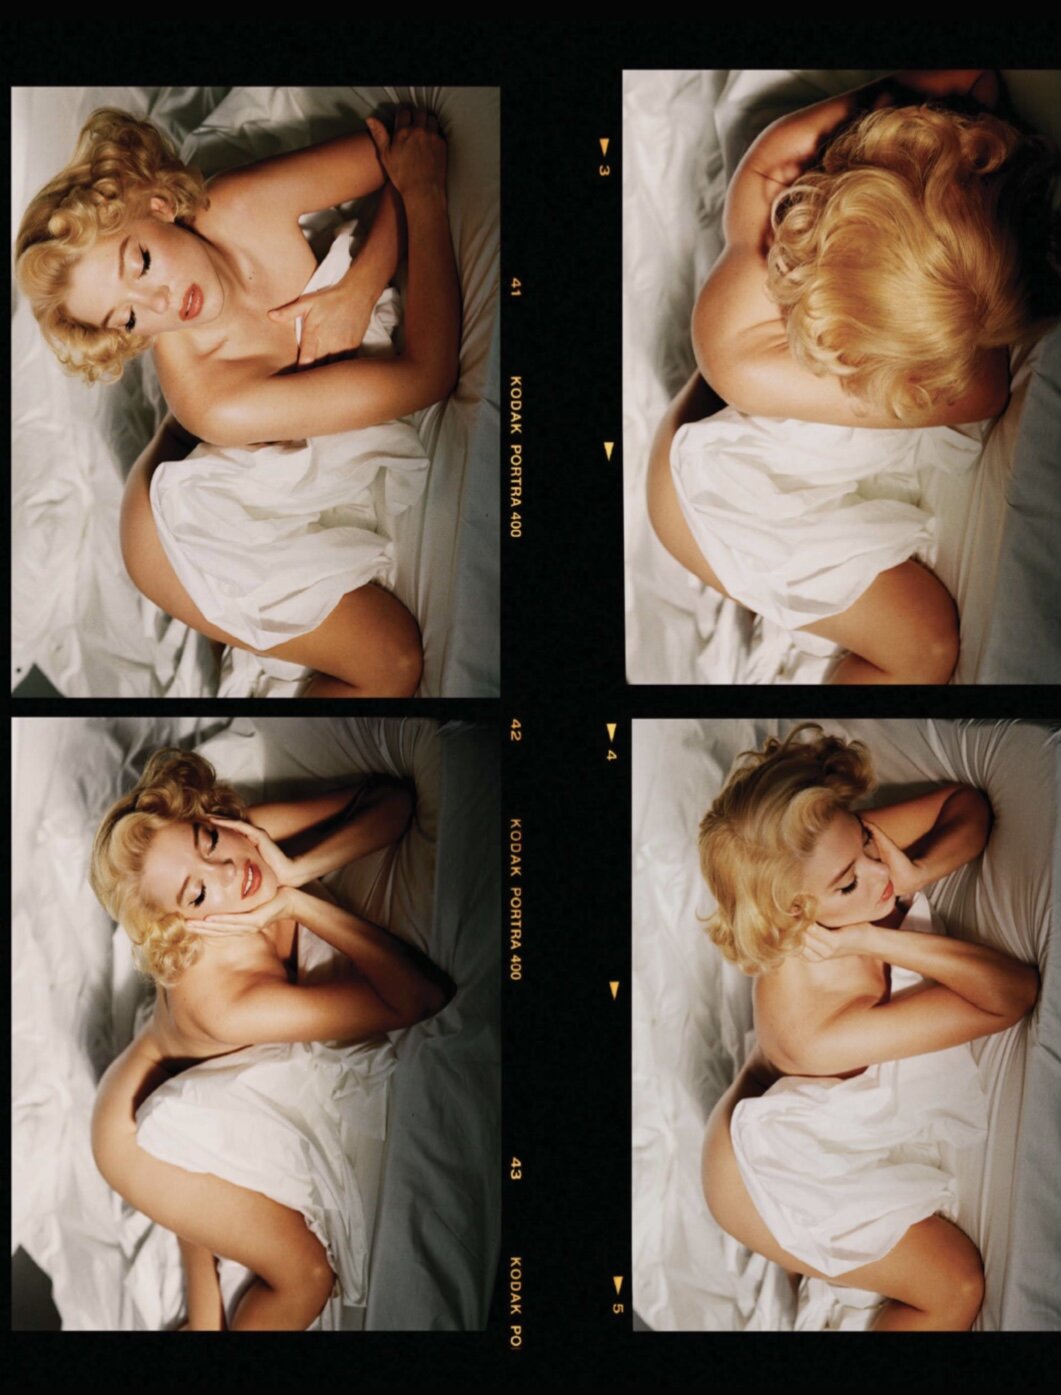 Léa Seydoux as Marilyn Monroe for Vogue - All About Cinema